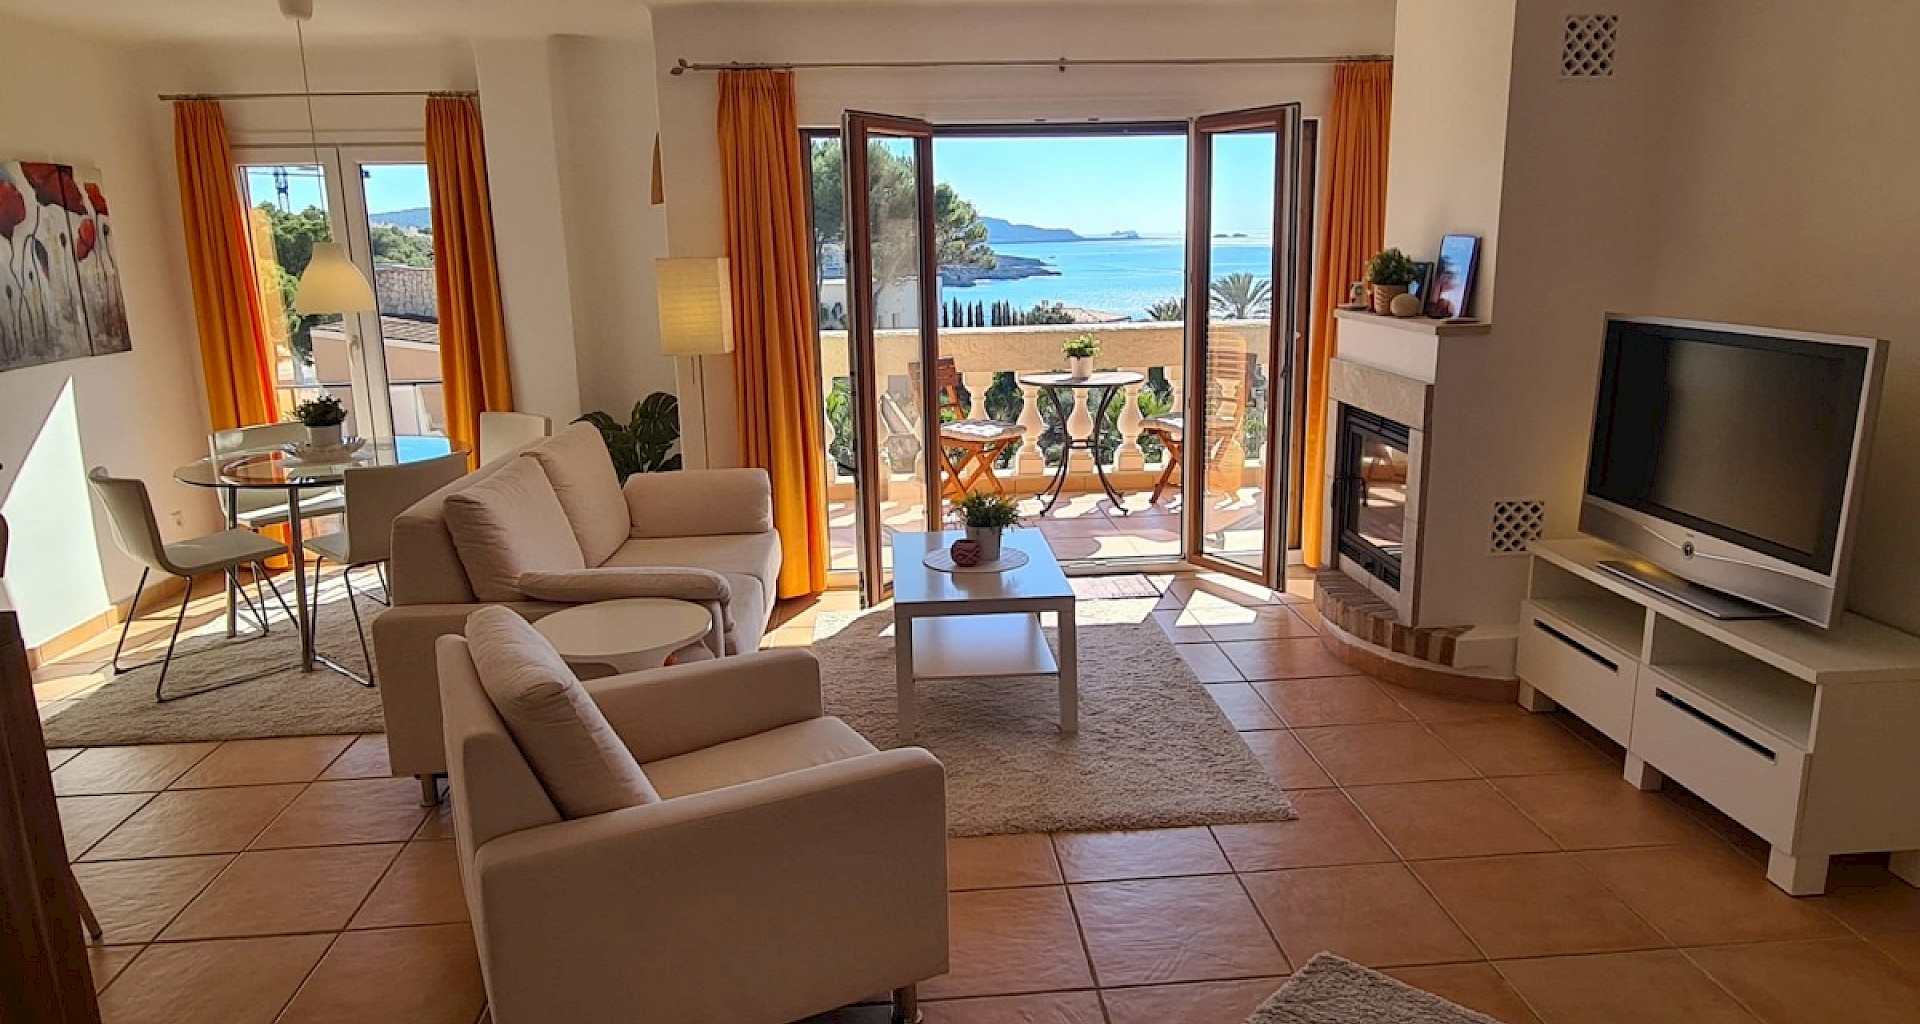 KROHN & LUEDEMANN Beautiful penthouse in Santa Ponsa with sea view to the Malgrats Islands 